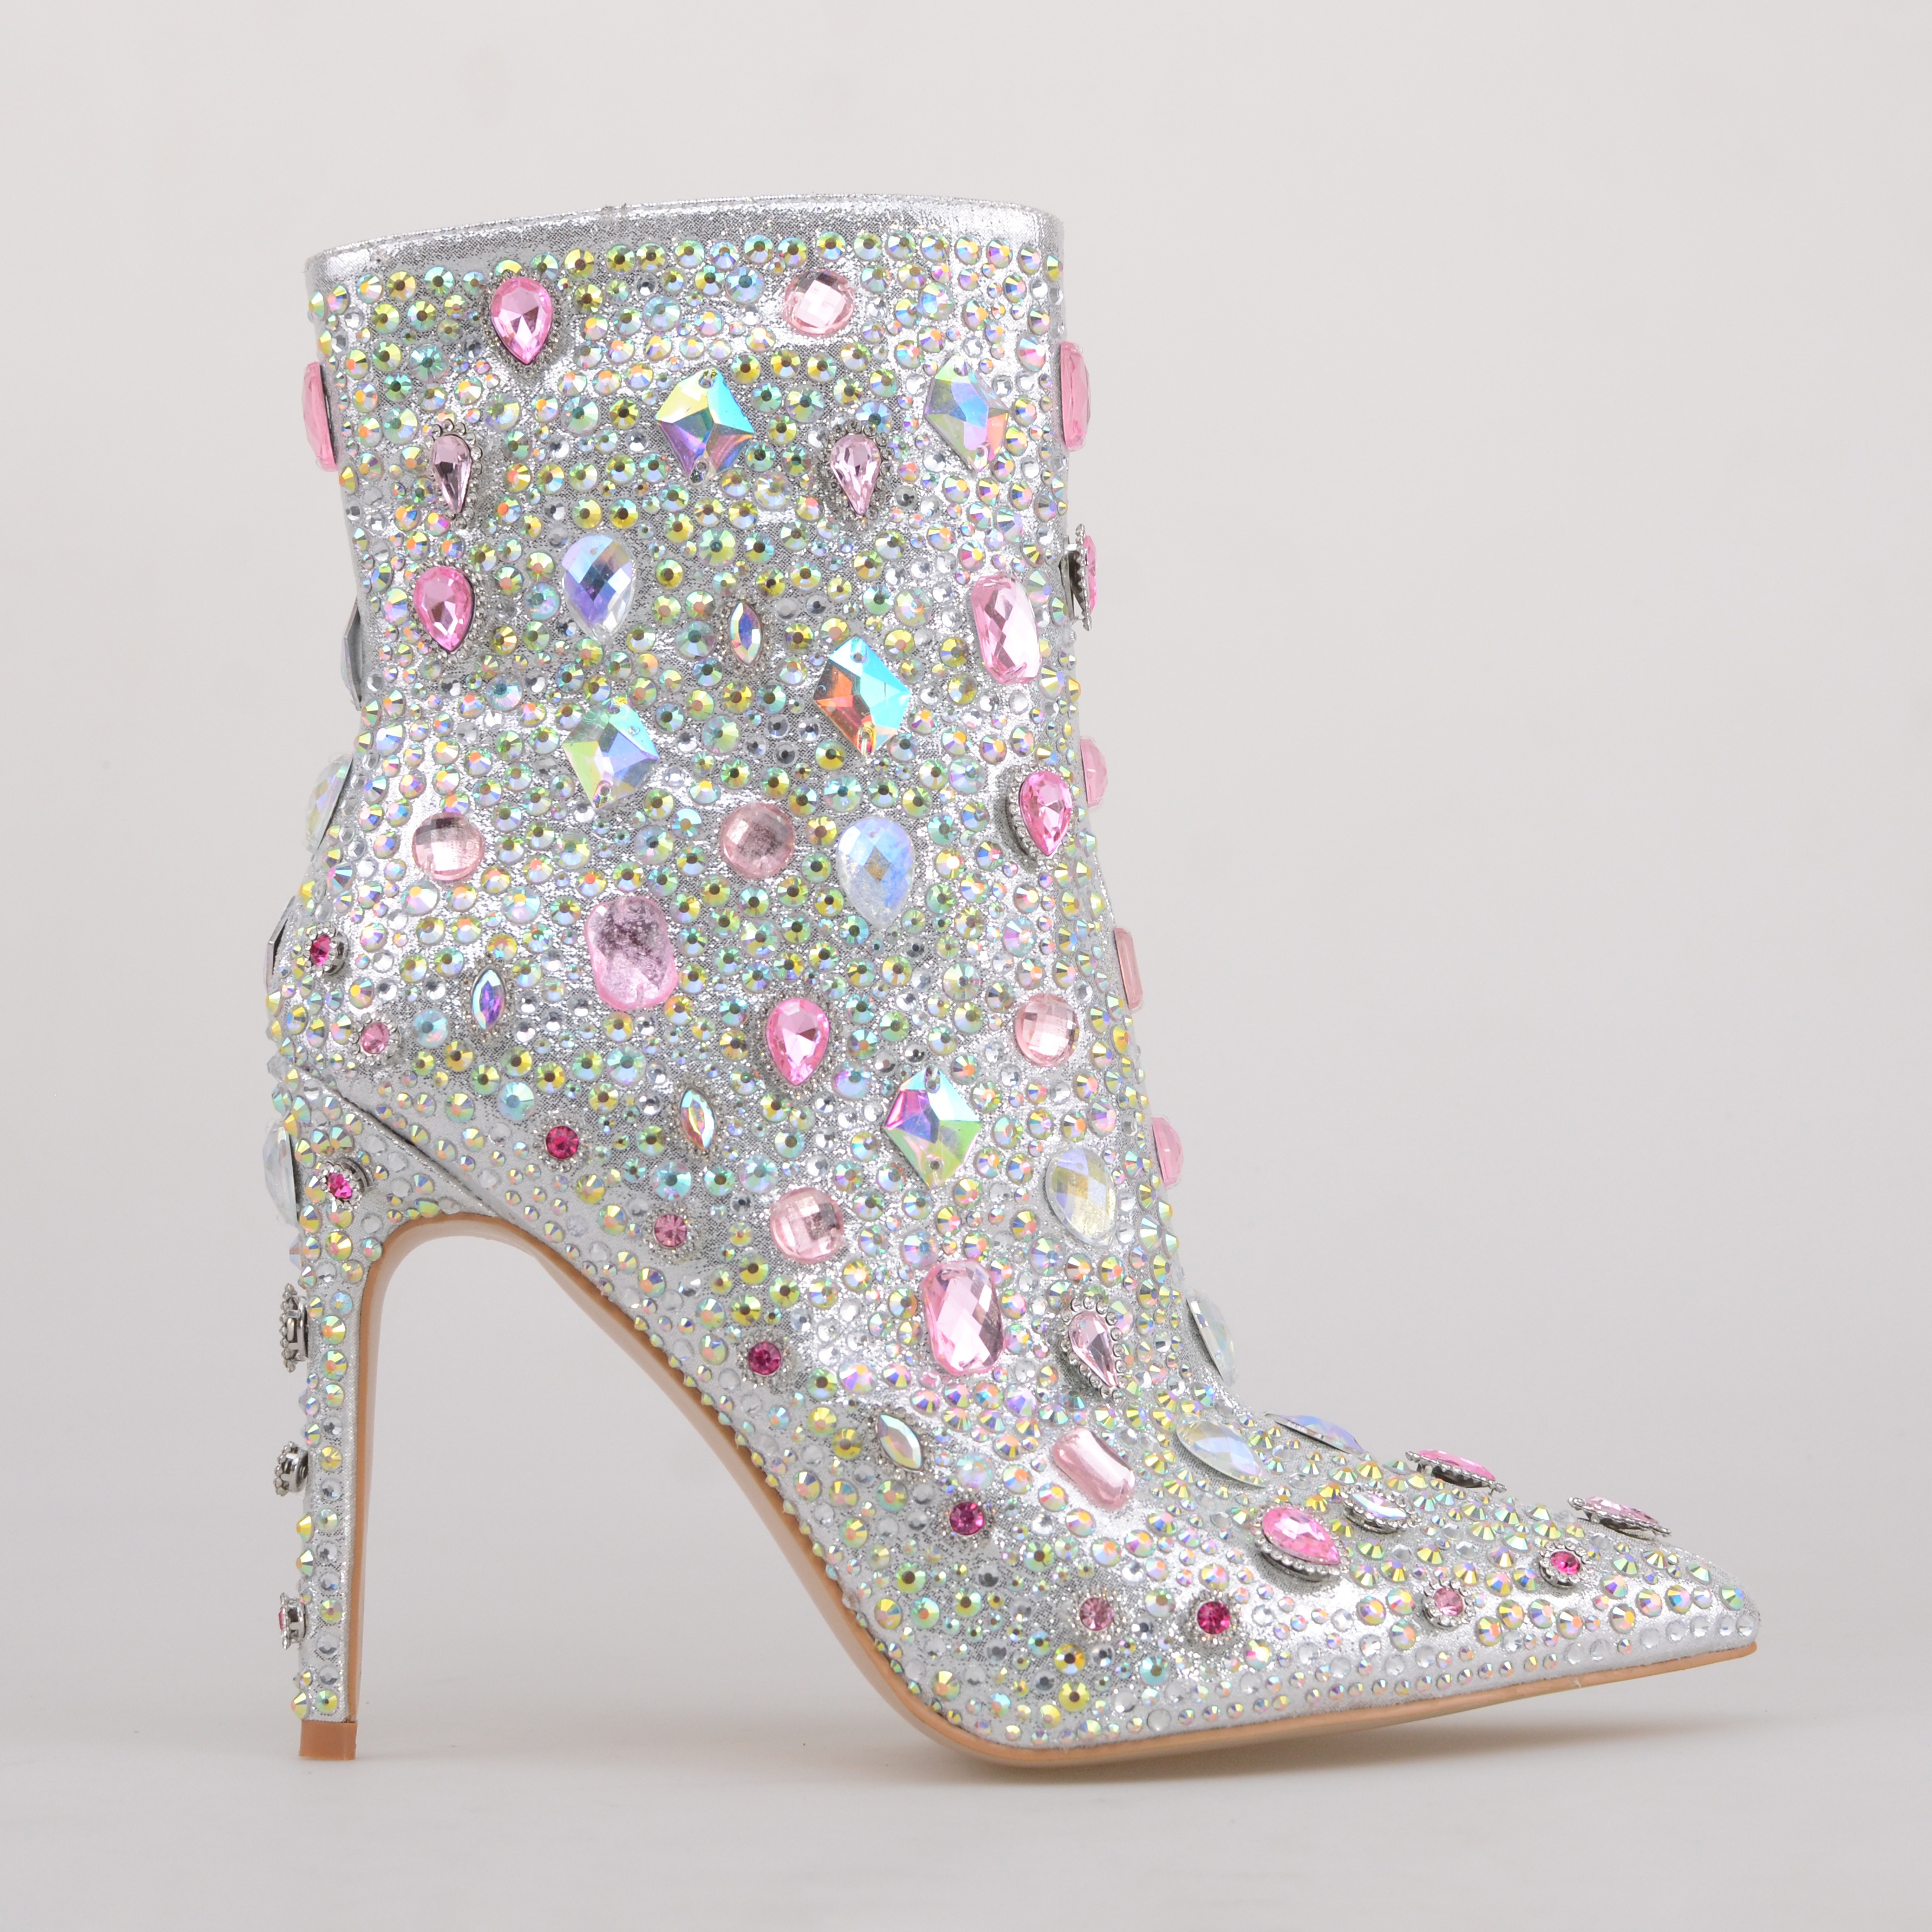 TAAFO Diamond-encrusted Jewelry Stiletto Heel Womens Shoes Rhinestones Silver Colors Ankle Boots High Heel B